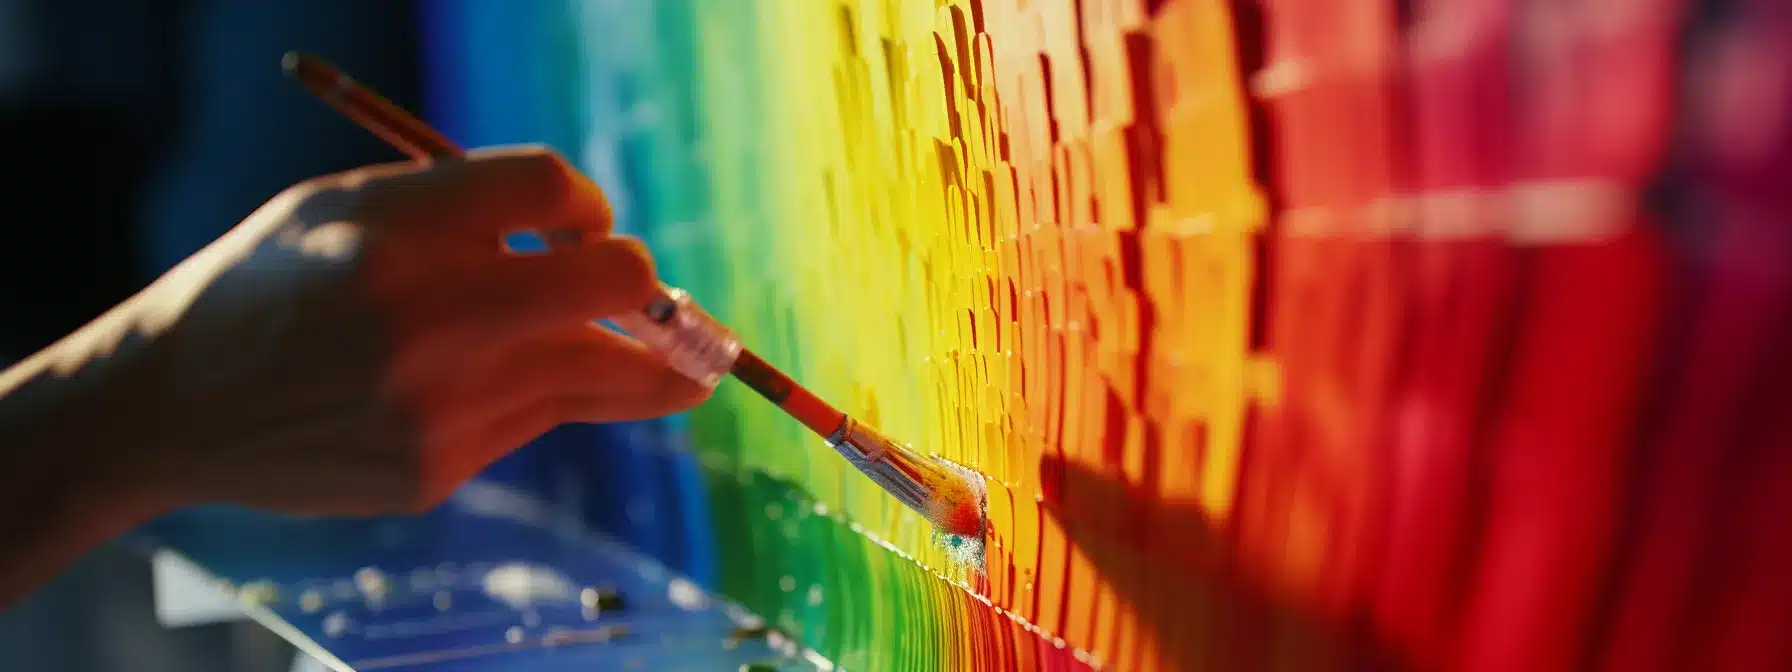 A Person Holding A Paintbrush, Creating A Vibrant Rainbow On A Canvas.